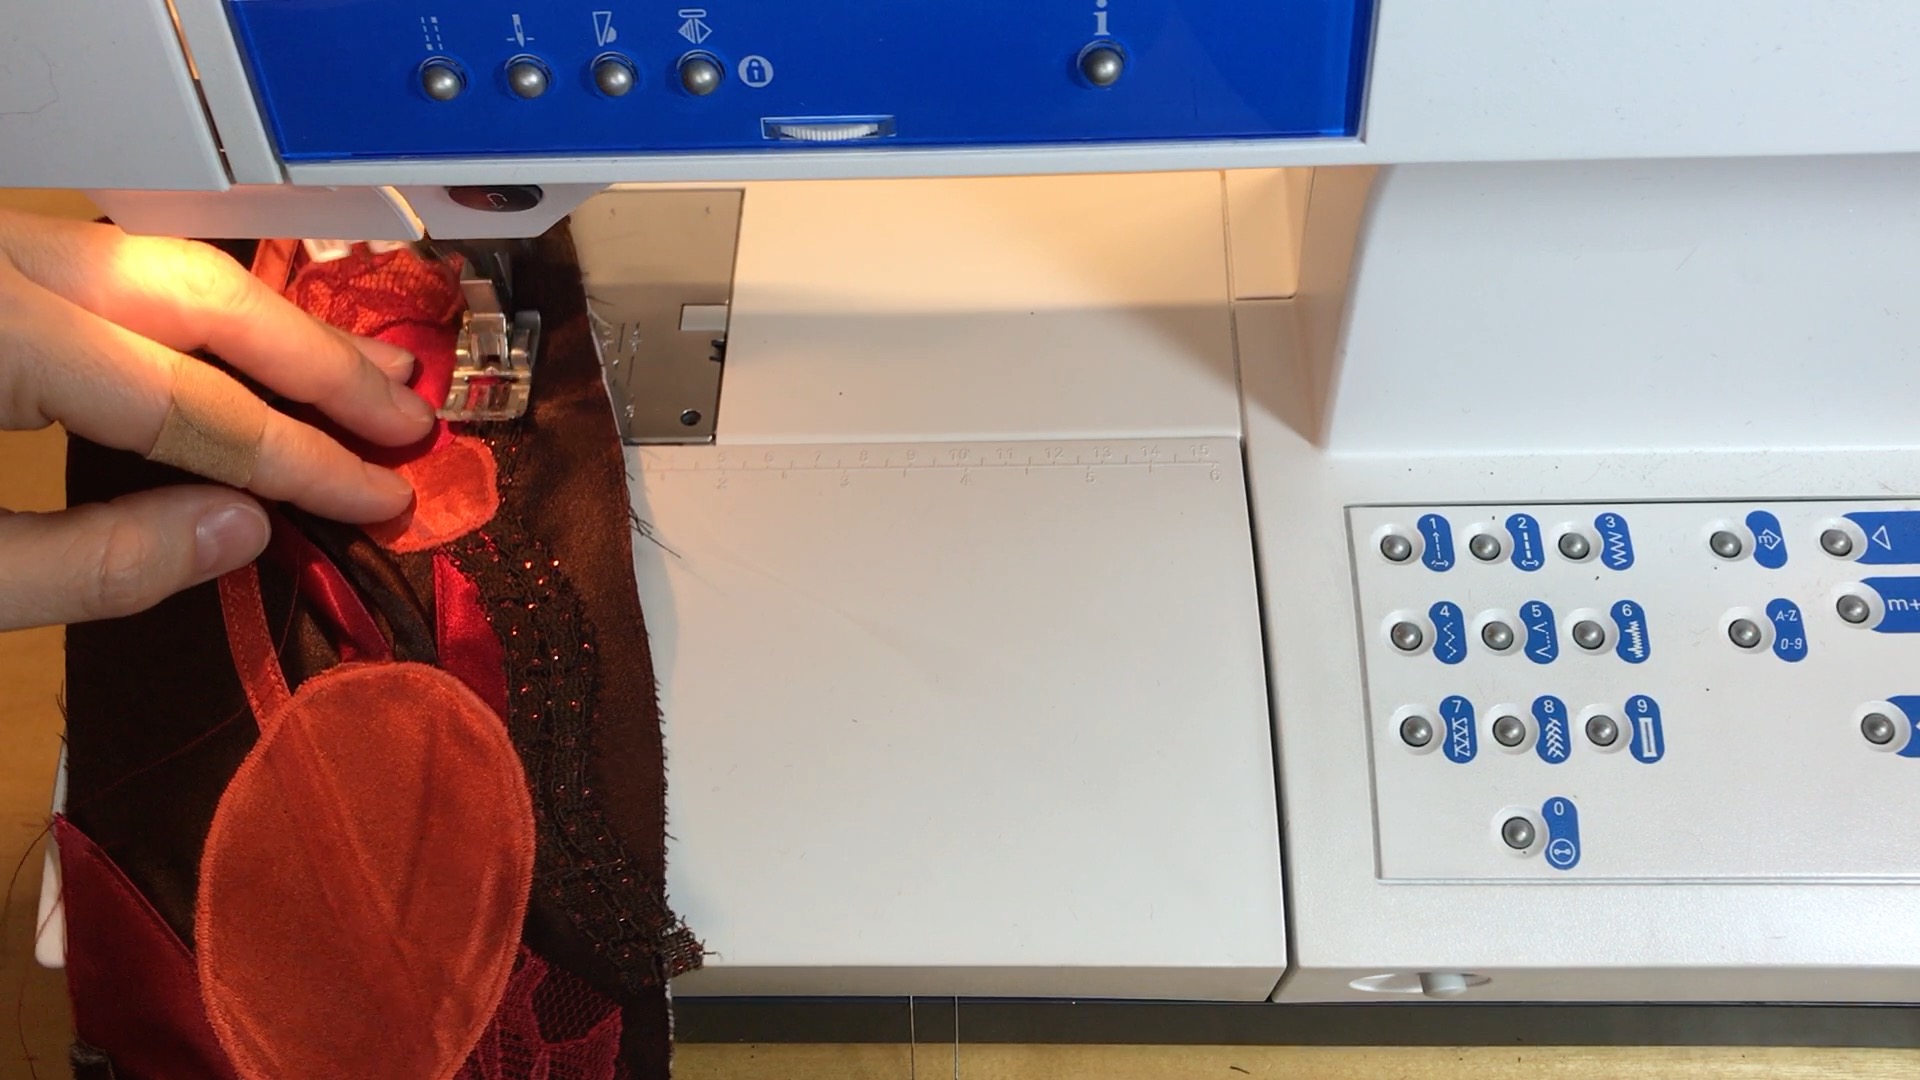 Sewing on Applique on a sewing machine